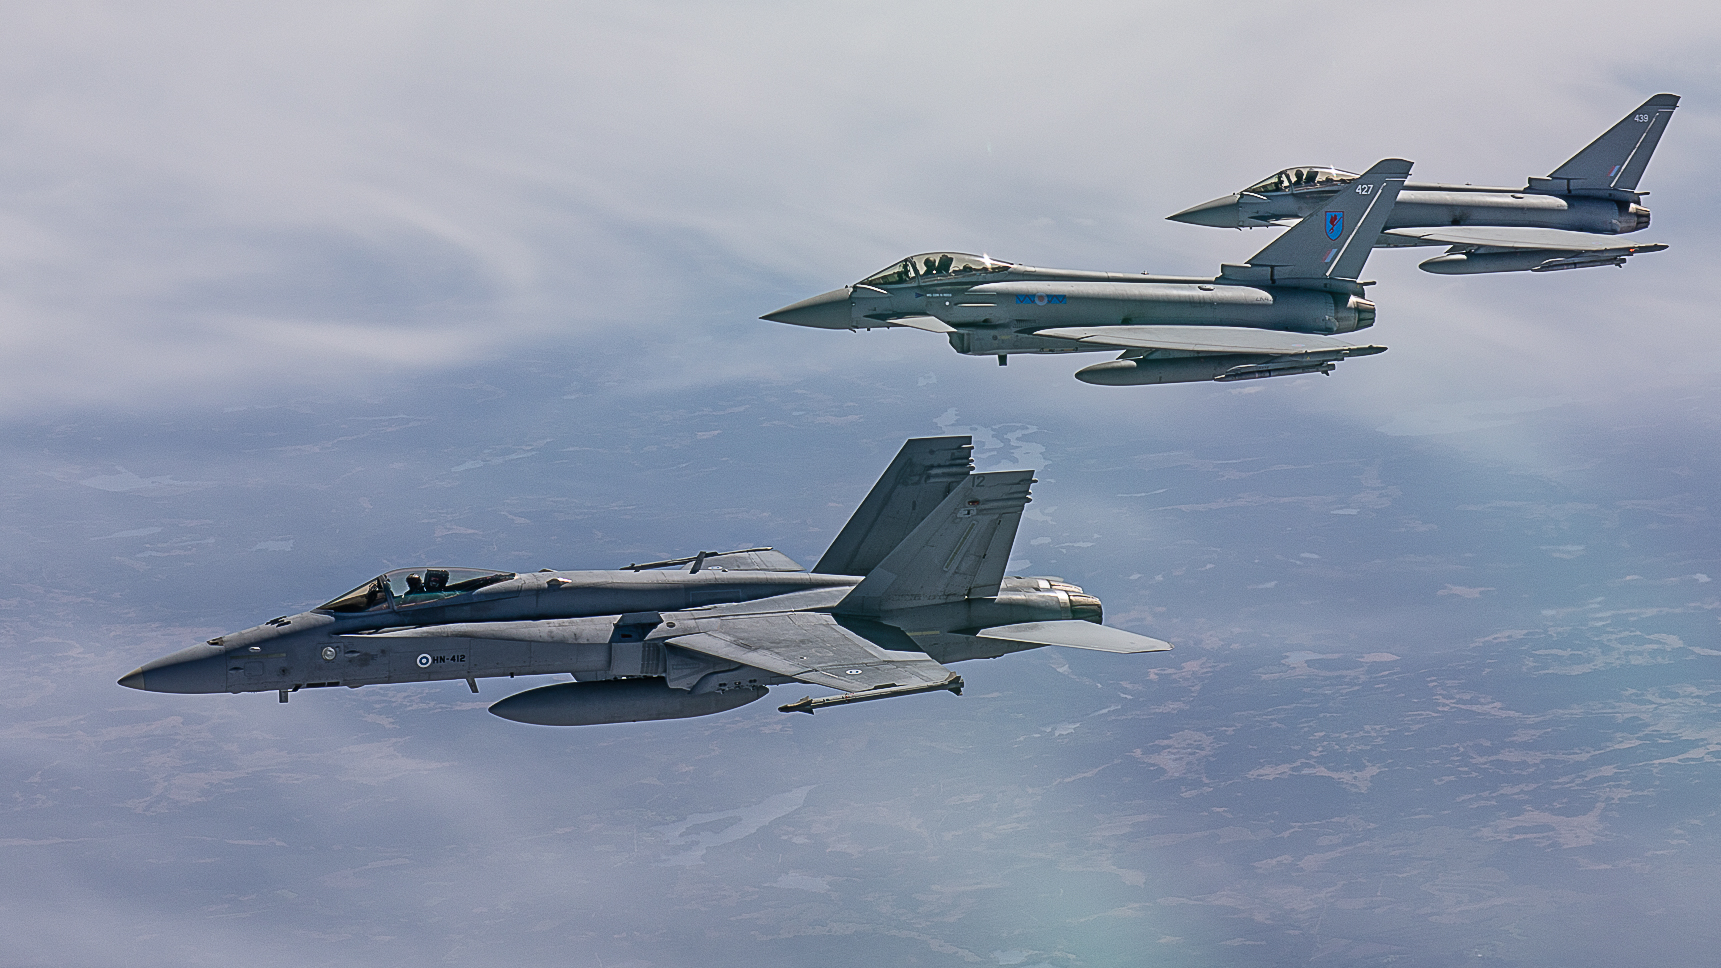 F/A-18 Hornet and two Eurofighter Typhoons